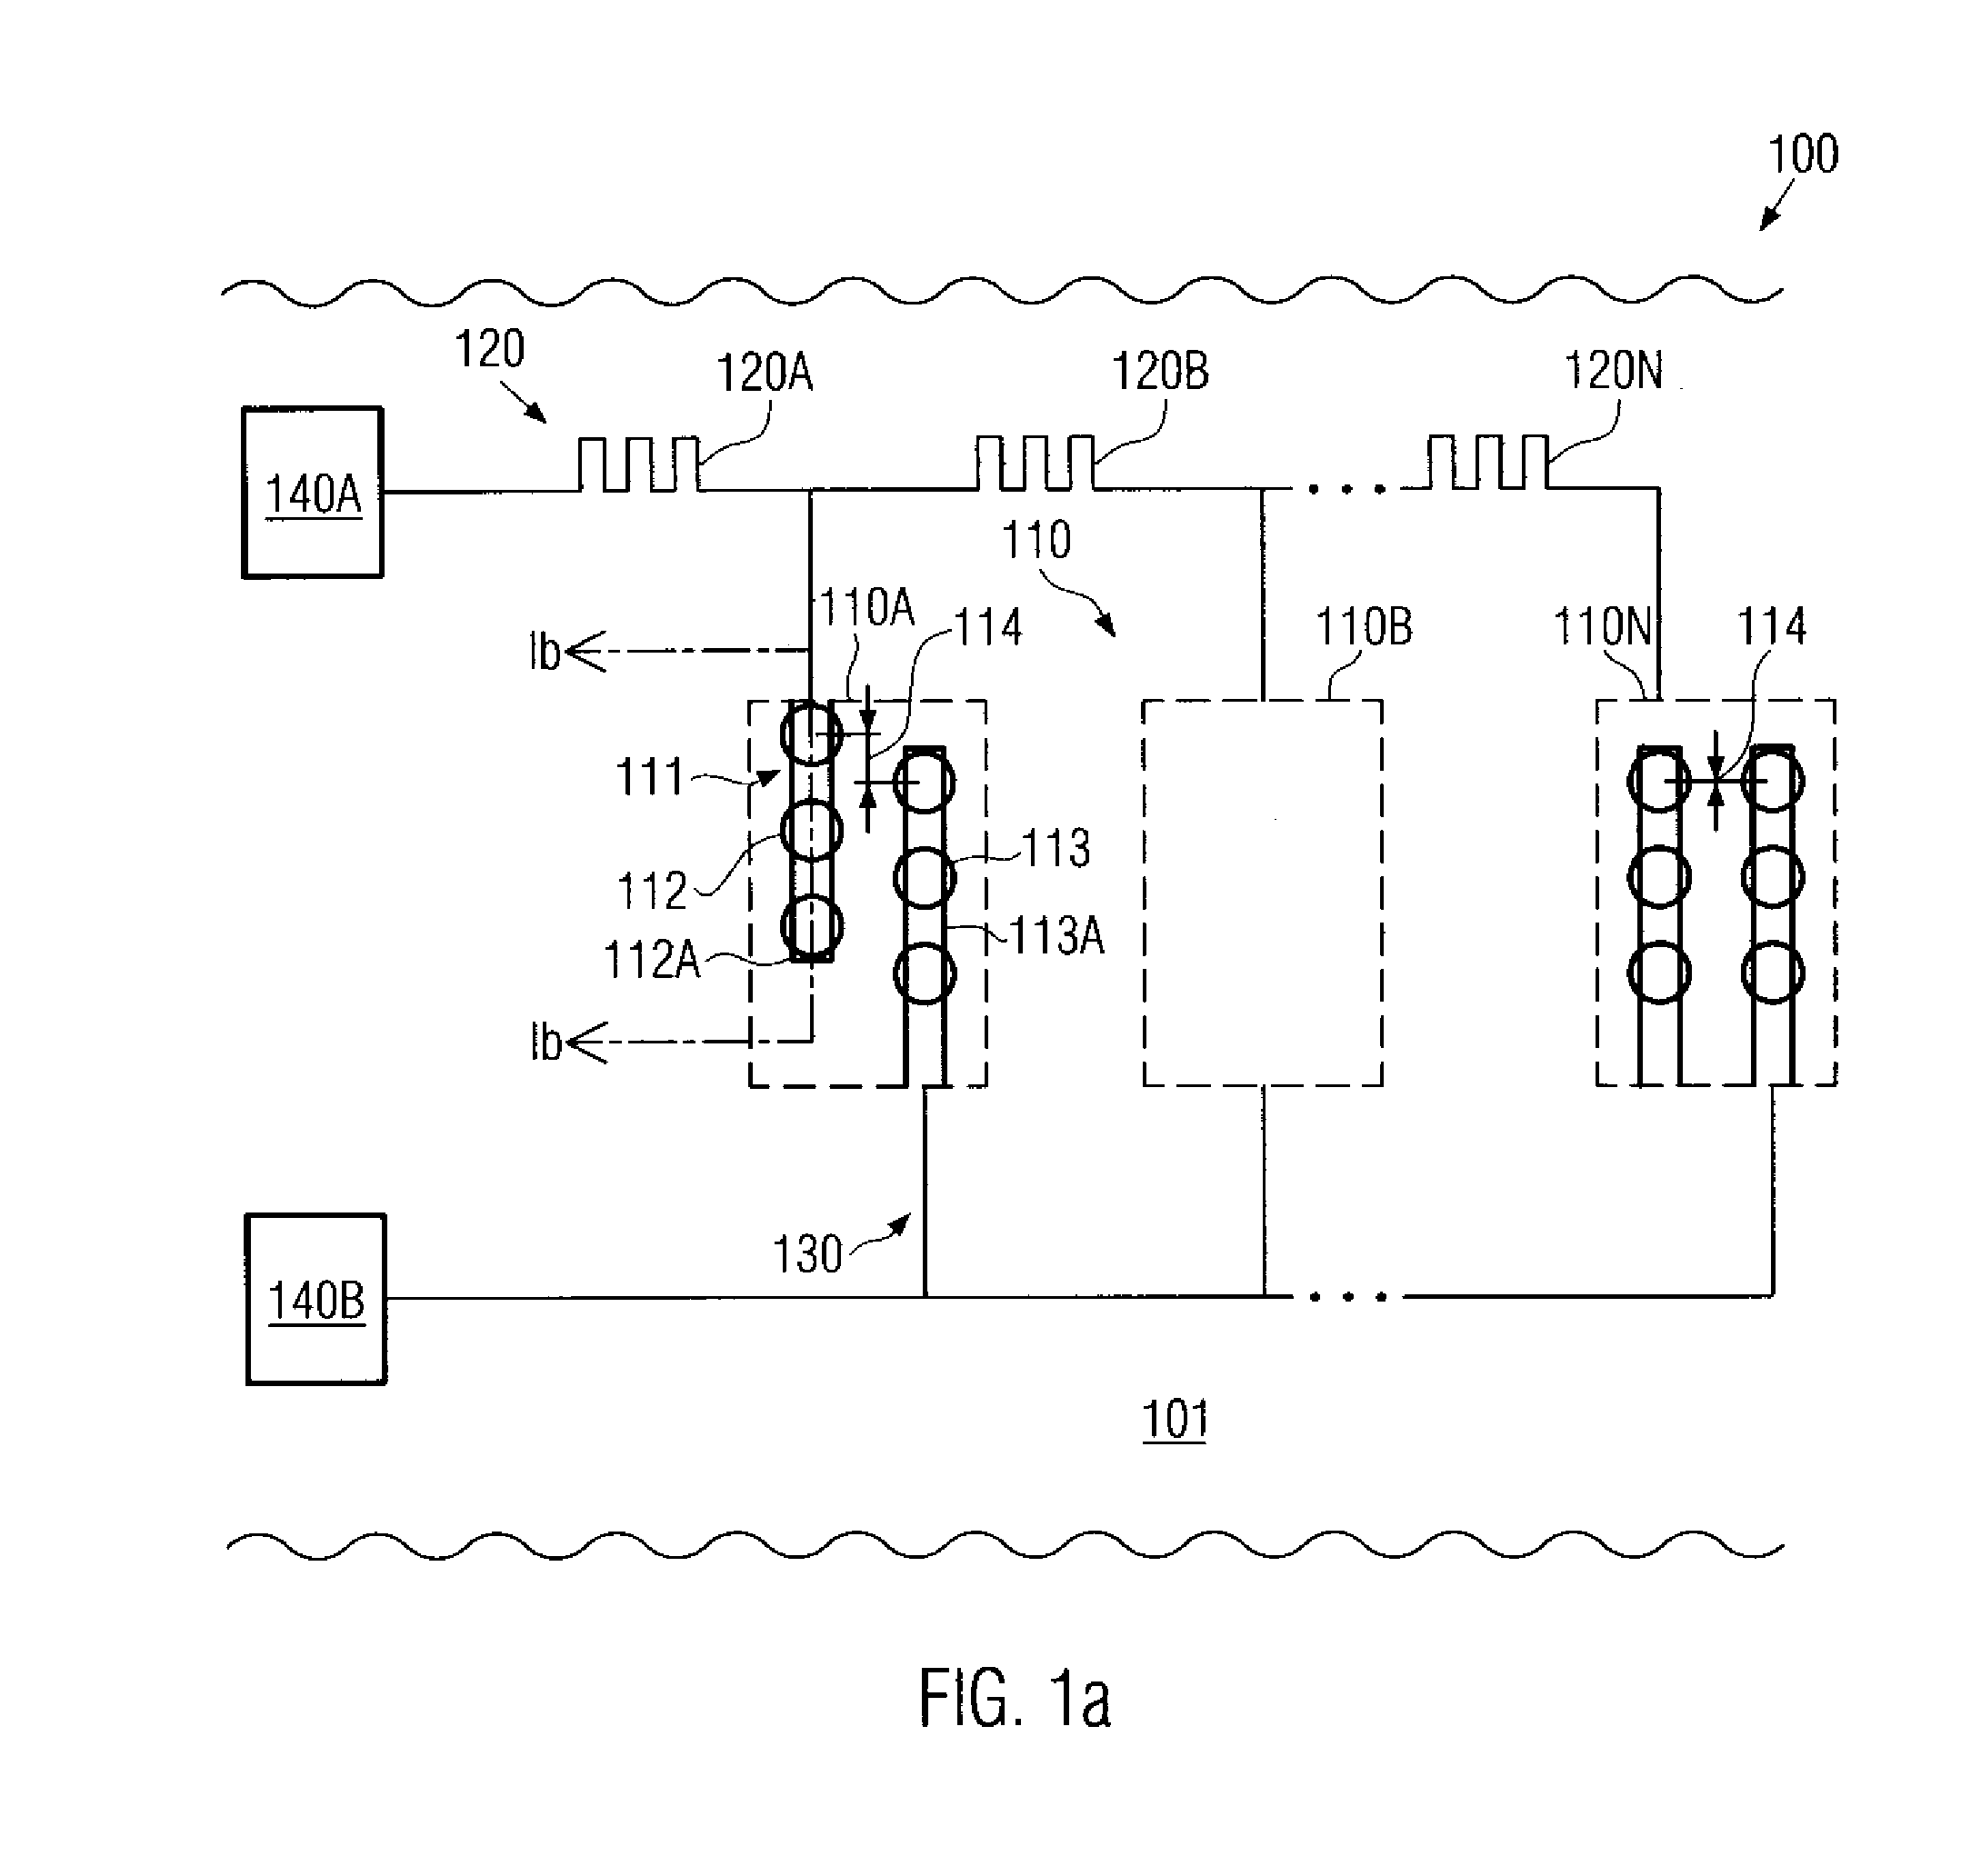 Test structure for monitoring leakage currents in a metallization layer